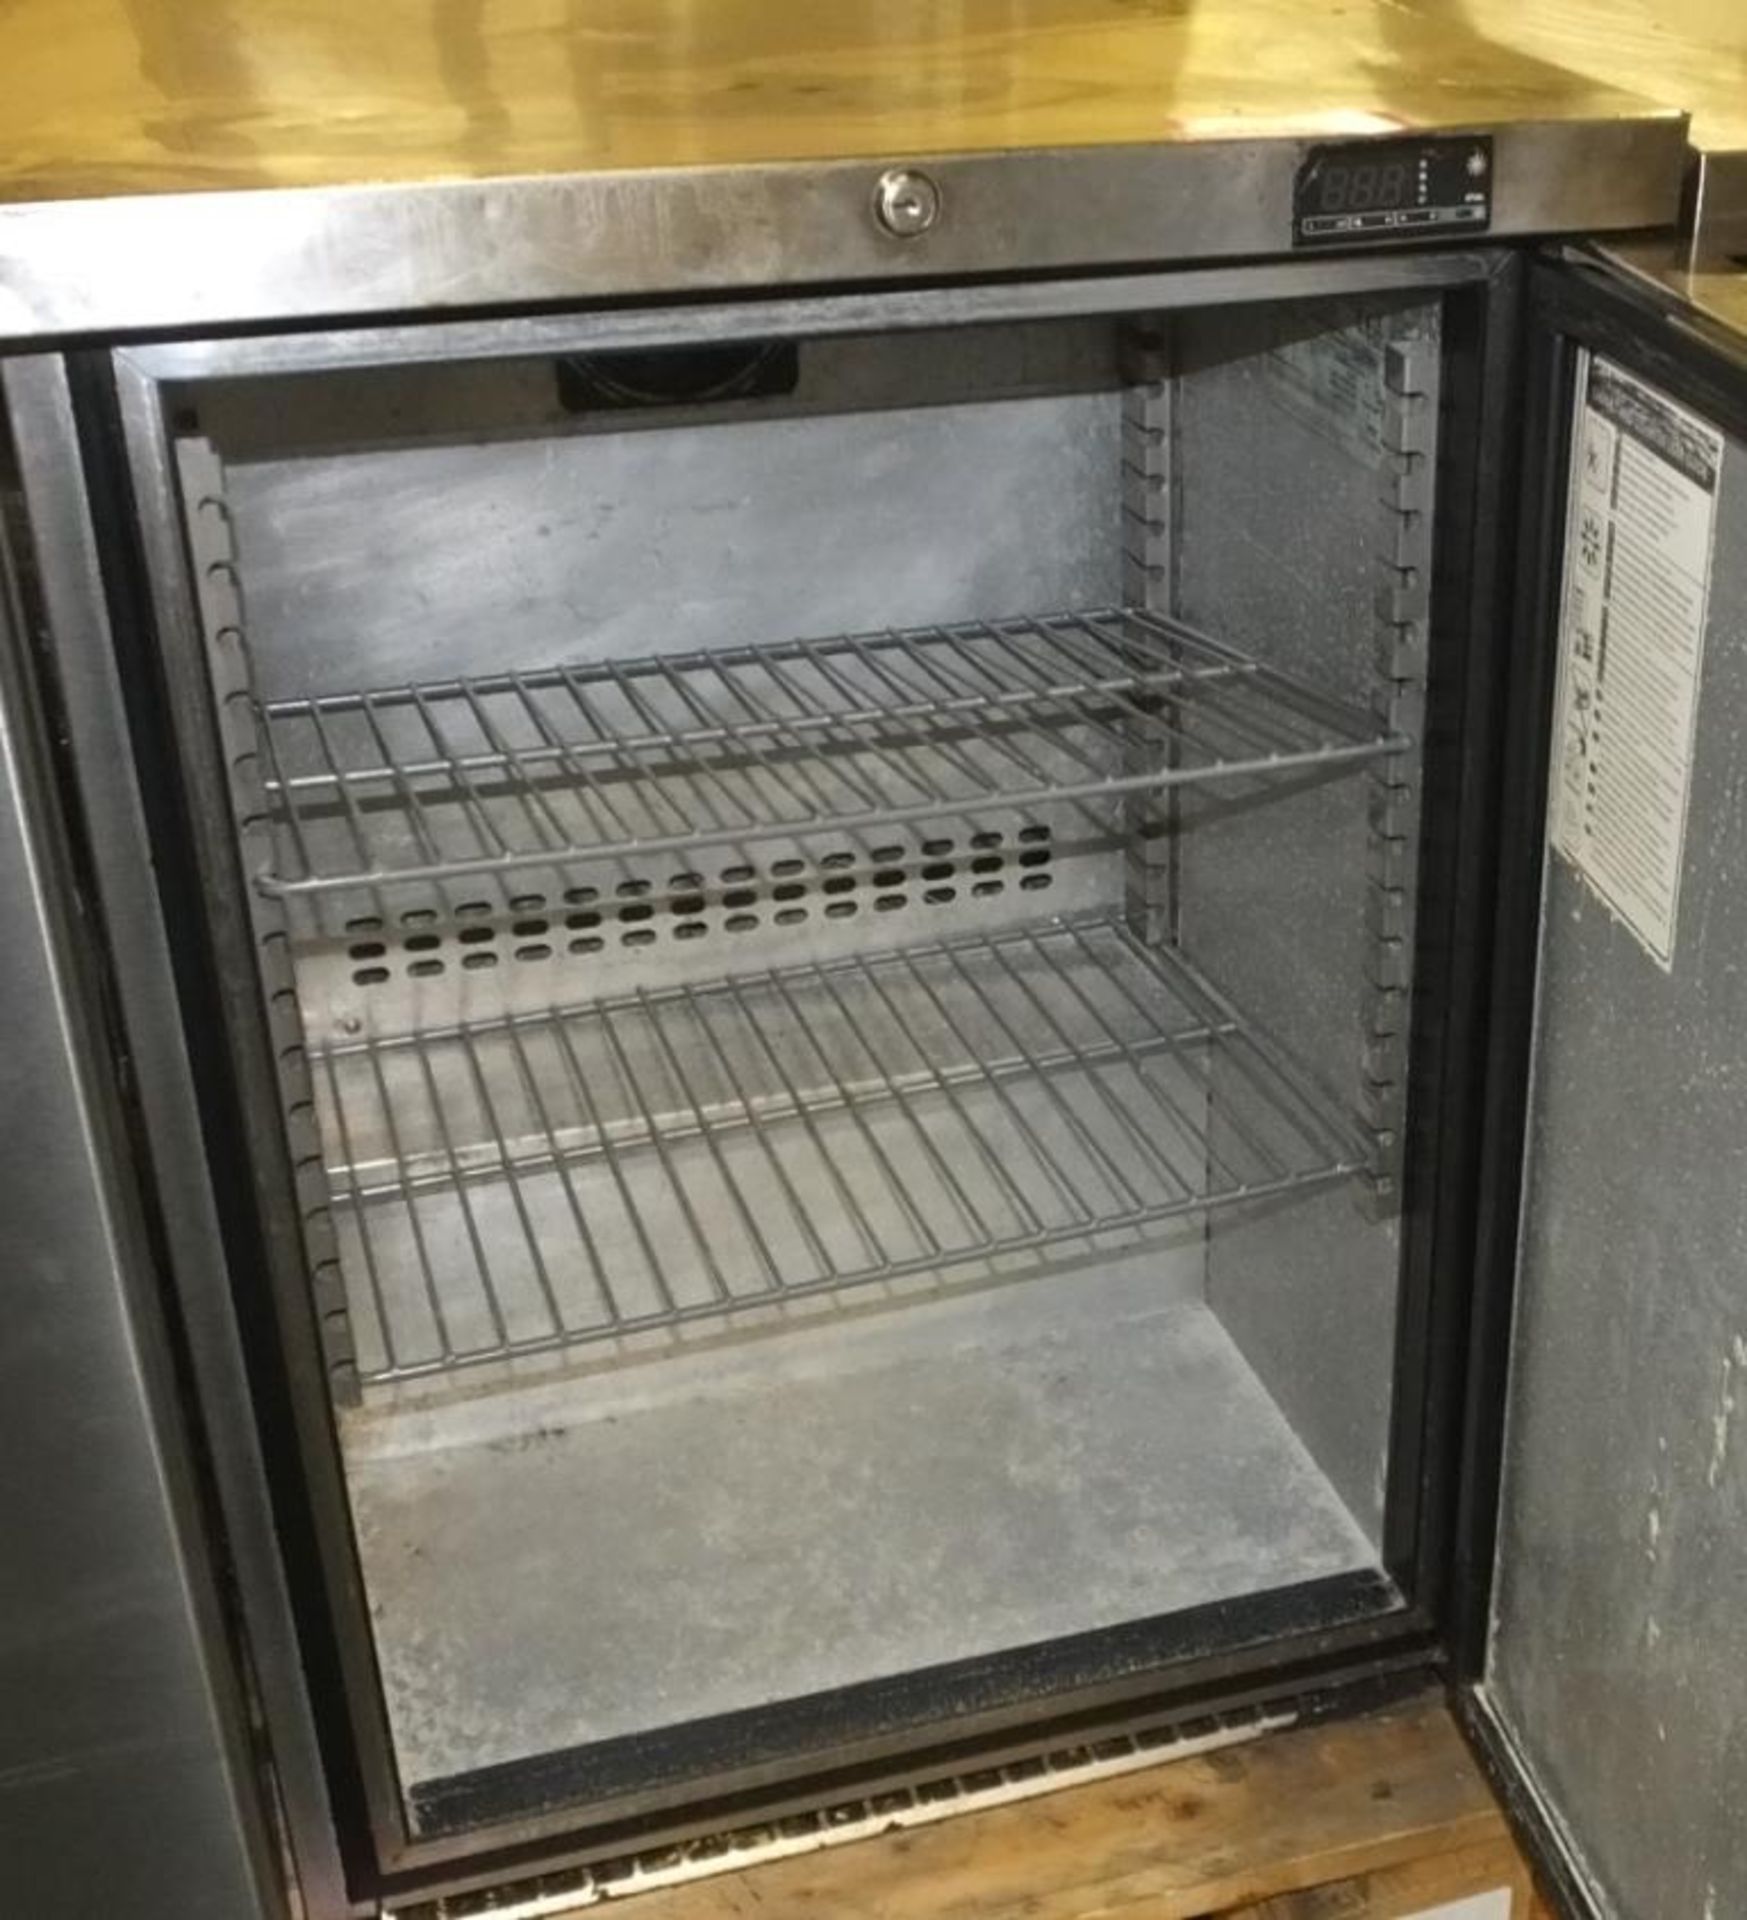 AS SPARES OR REPAIRS - Fosters under counter fridge - Image 2 of 2